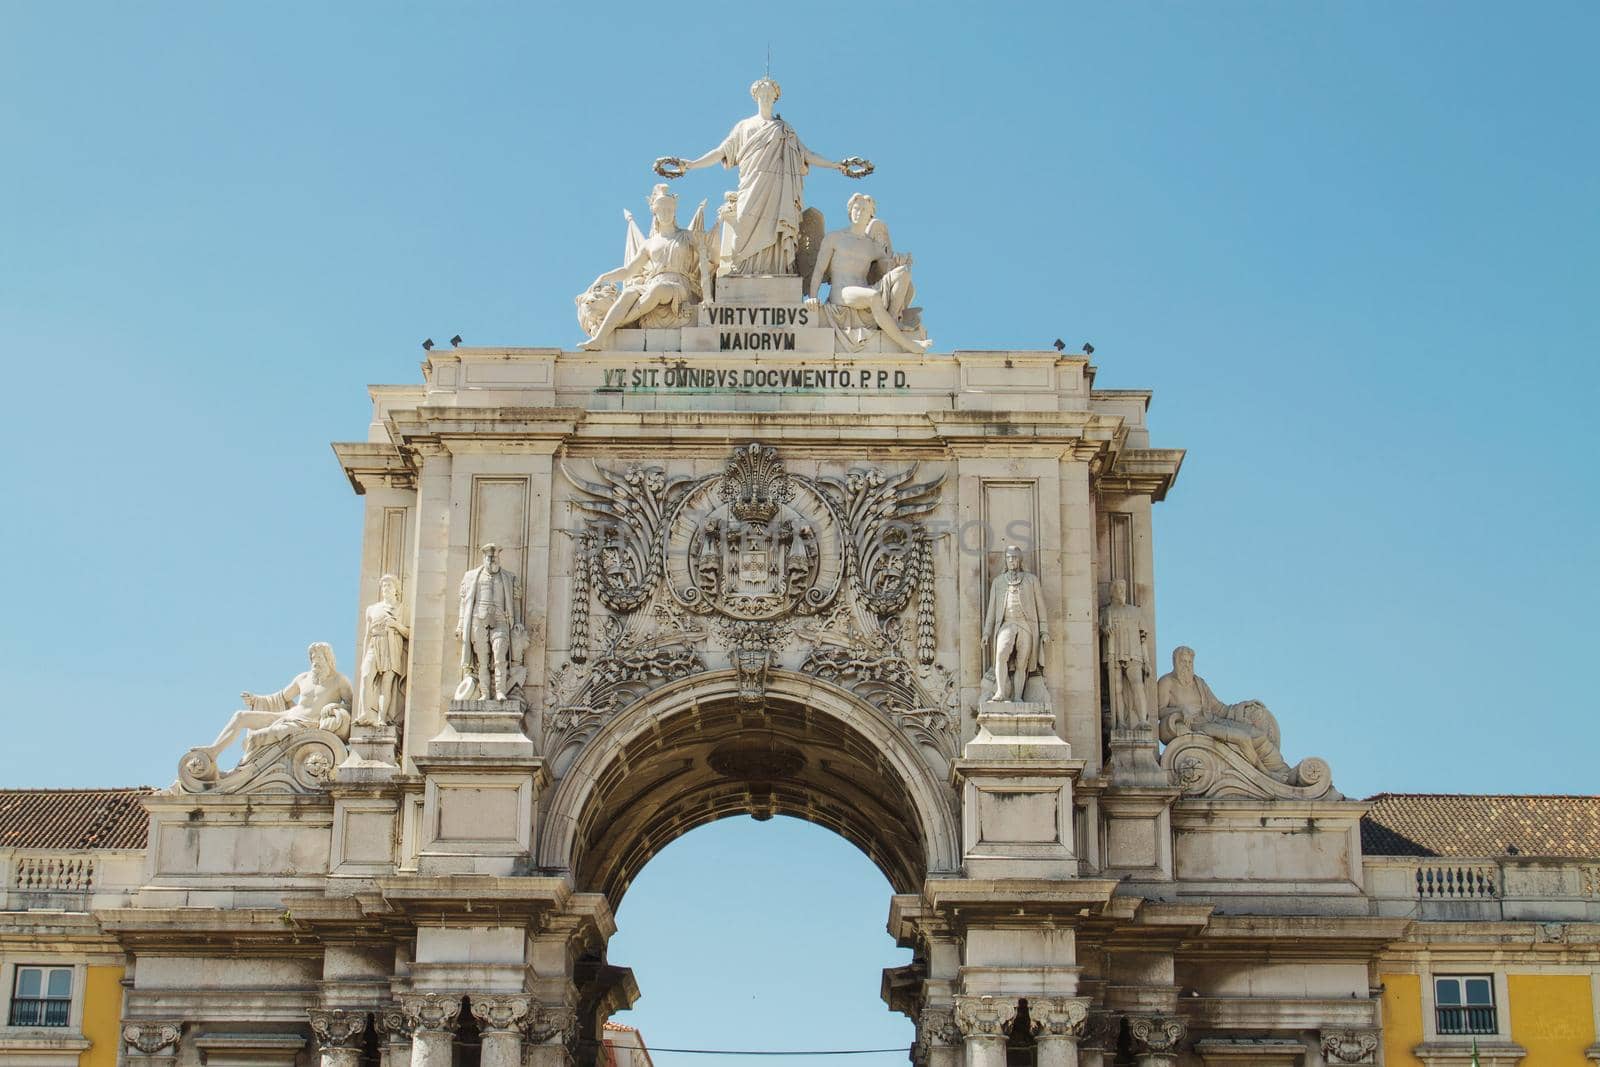 Detail of Rua Augusta Arch, Lisbon, Portugal photographed from low view point